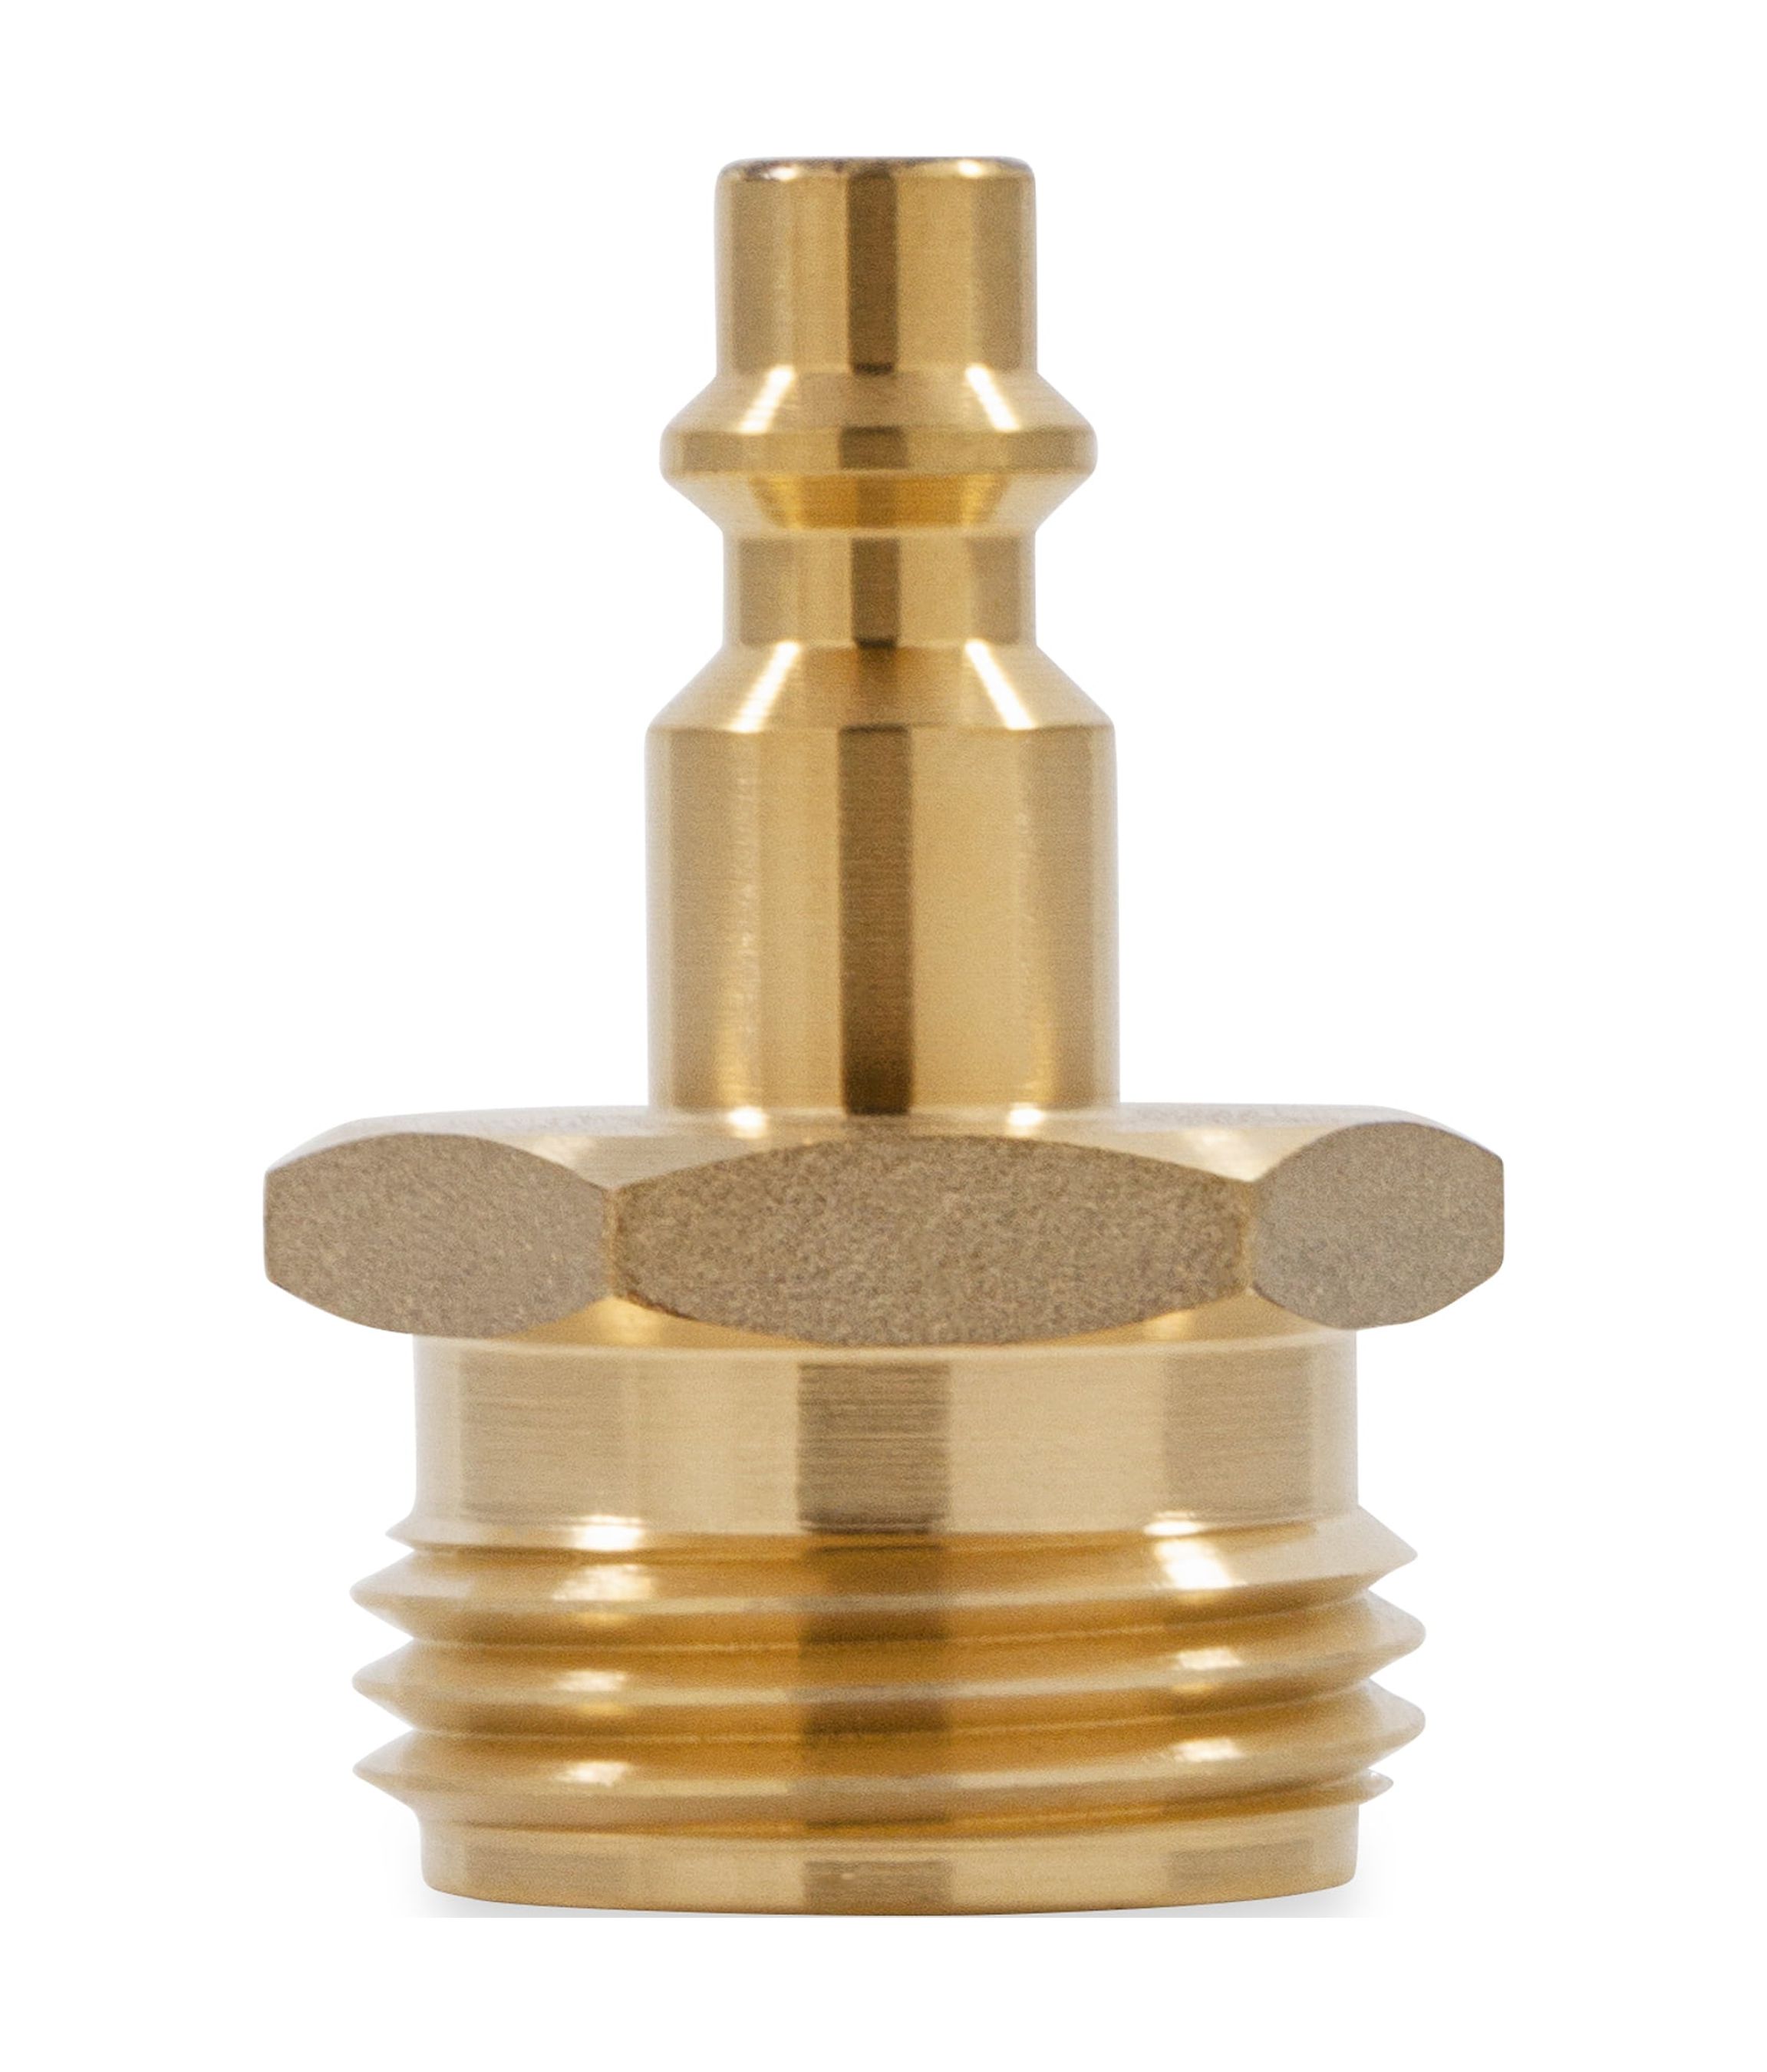 Blow Out Plug, Quick Connect - Brass (Eng/Fr) - image 1 of 9